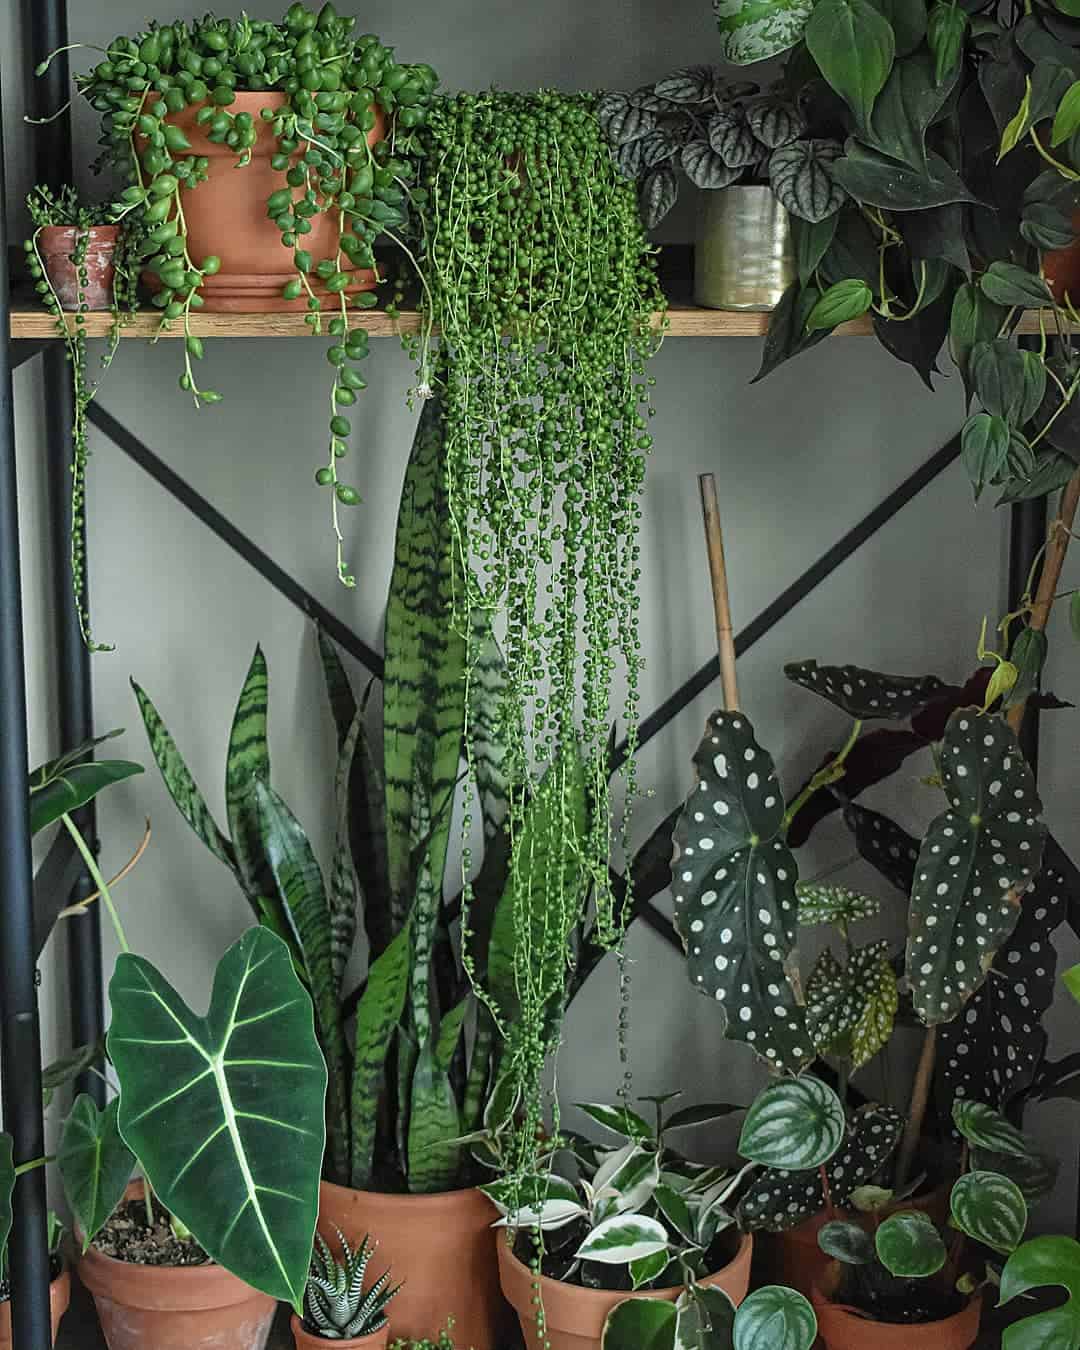 A collection of various potted houseplants arranged on a two-tiered shelf. The top shelf features hanging succulents and leafy plants, while the bottom shelf includes snake plants, polka dot begonia, and other heart-stealing greenery, creating a lush, vibrant display.